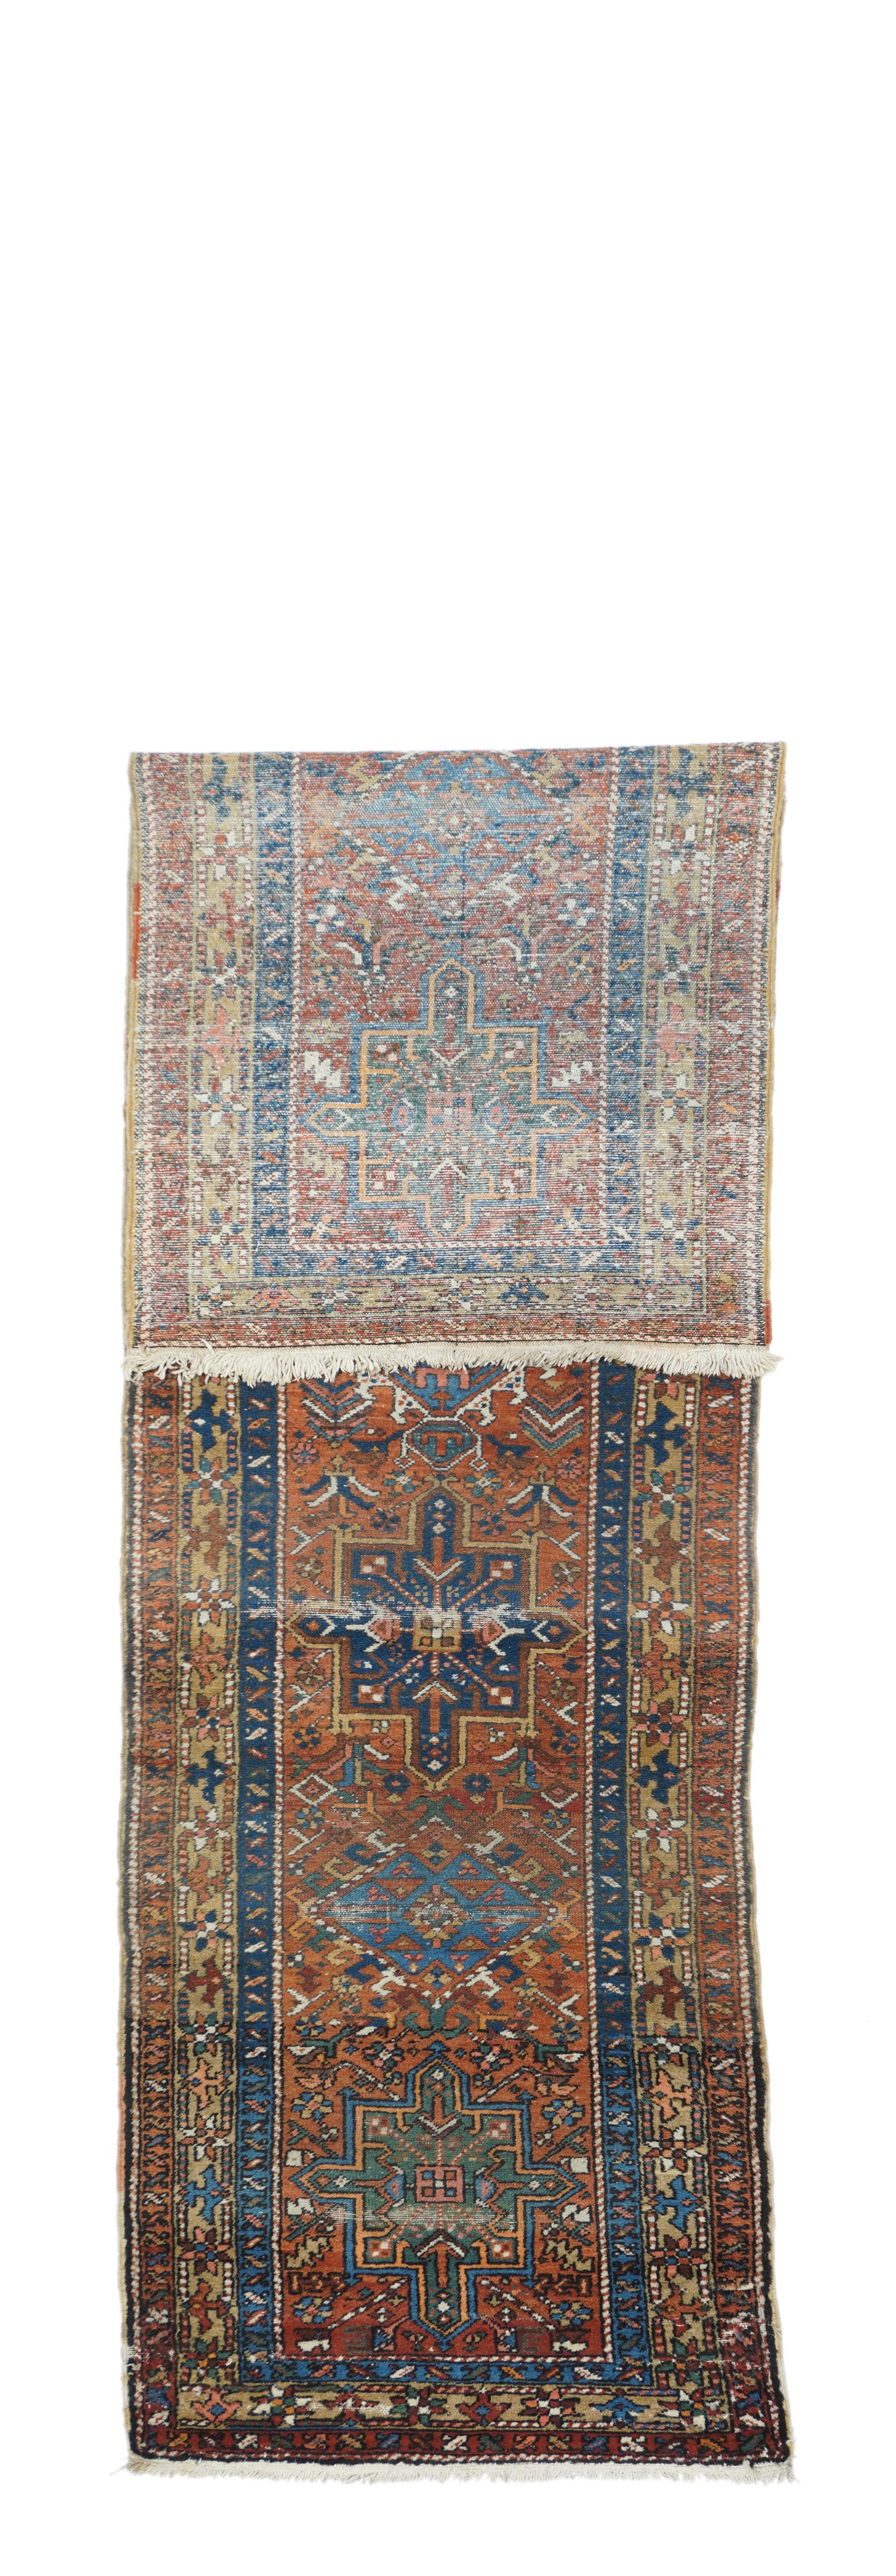 This NW Persian rustic runner from the Greater Heriz Weaving District, shows several horizontal lines of stair wear on a tomato red field decorated with seven medallions: hooked lozenges, ecru-hooked hexagons, and blue or green octogrammes. Stylised